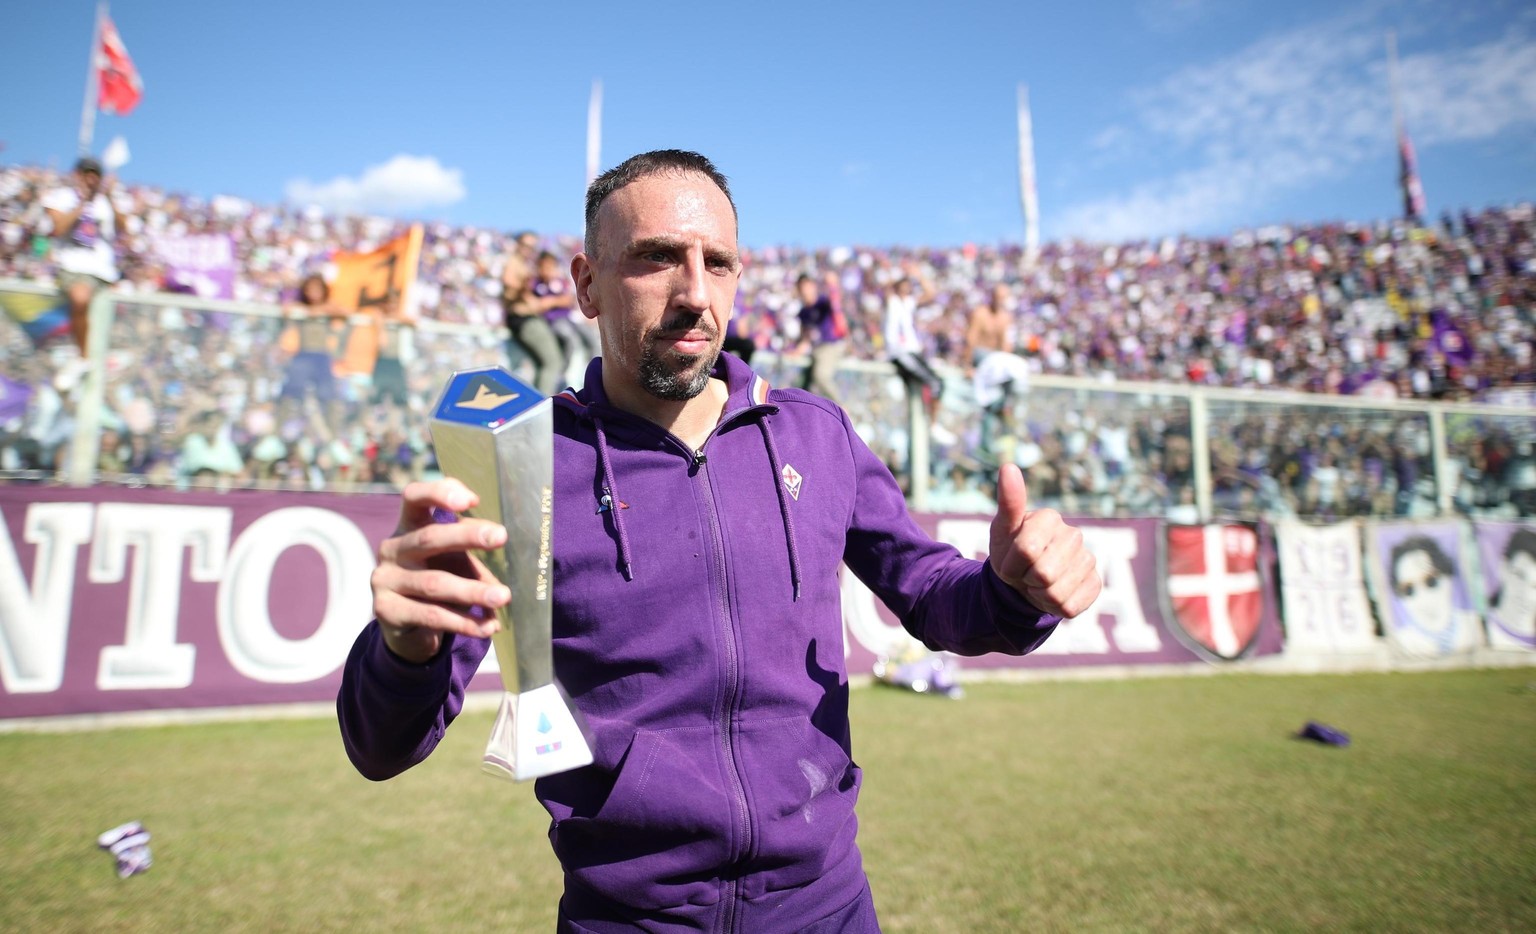 Fiorentina&#039;s Franck Ribery waves to fans prior to the Italian Serie A soccer match between Fiorentina and Udinese, at the Artemio Franchi stadium in Florence, Italy, Sunday, Oct. 6 2019. (Claudio ...